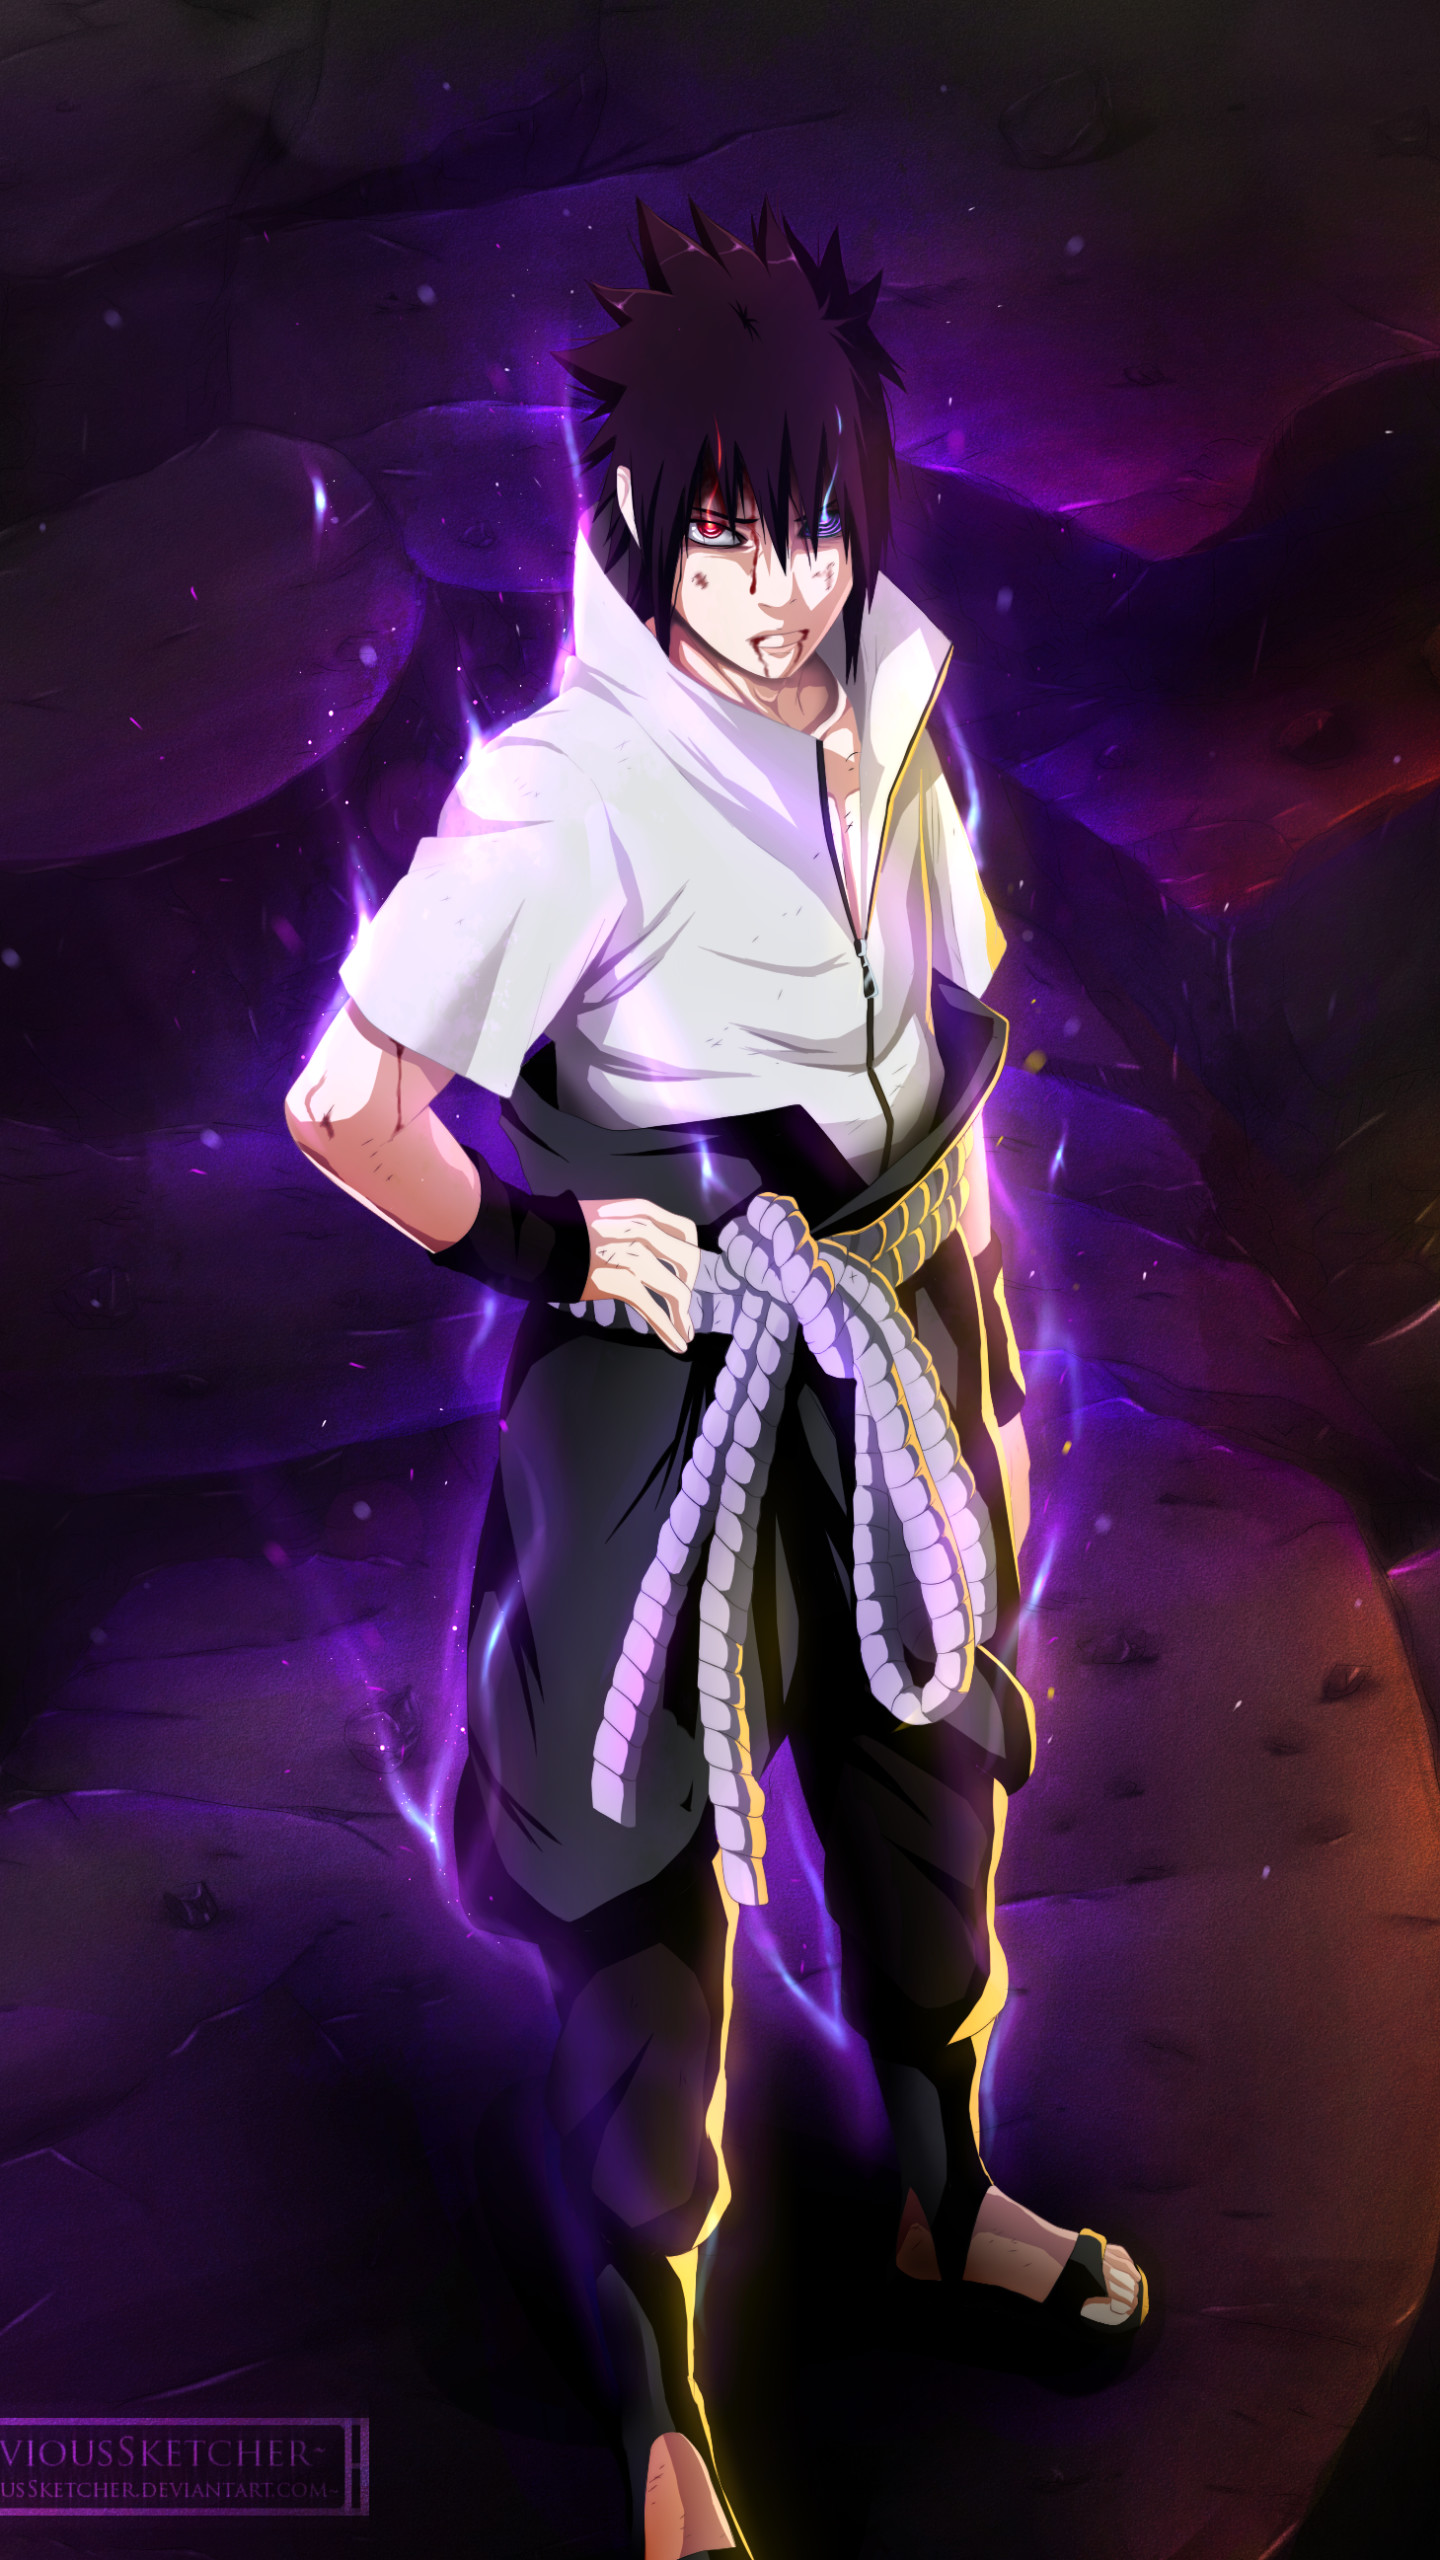 1440x2560 Download this Wallpaper Anime/Naruto () for all your Phones and  Tablets.